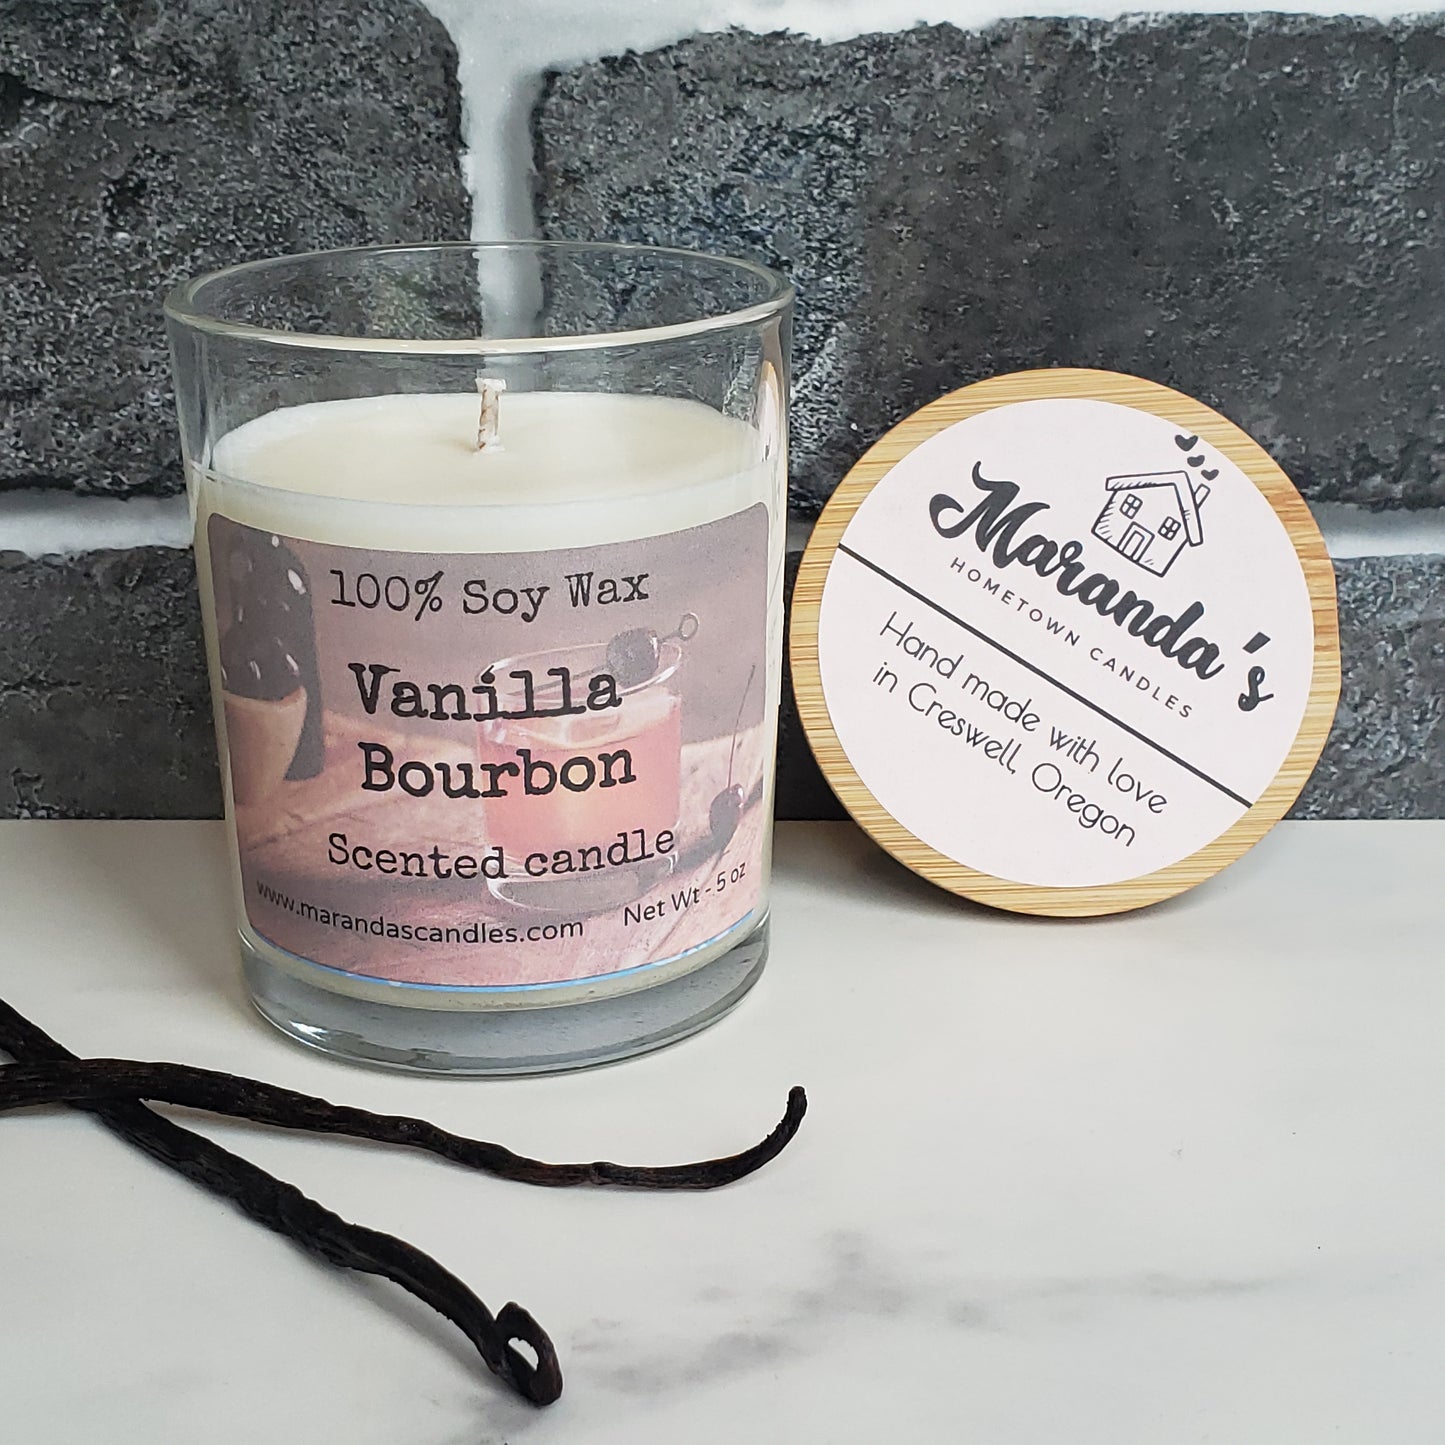 Vanilla Bourbon Scented Soy Wax Candle/Wax Melts